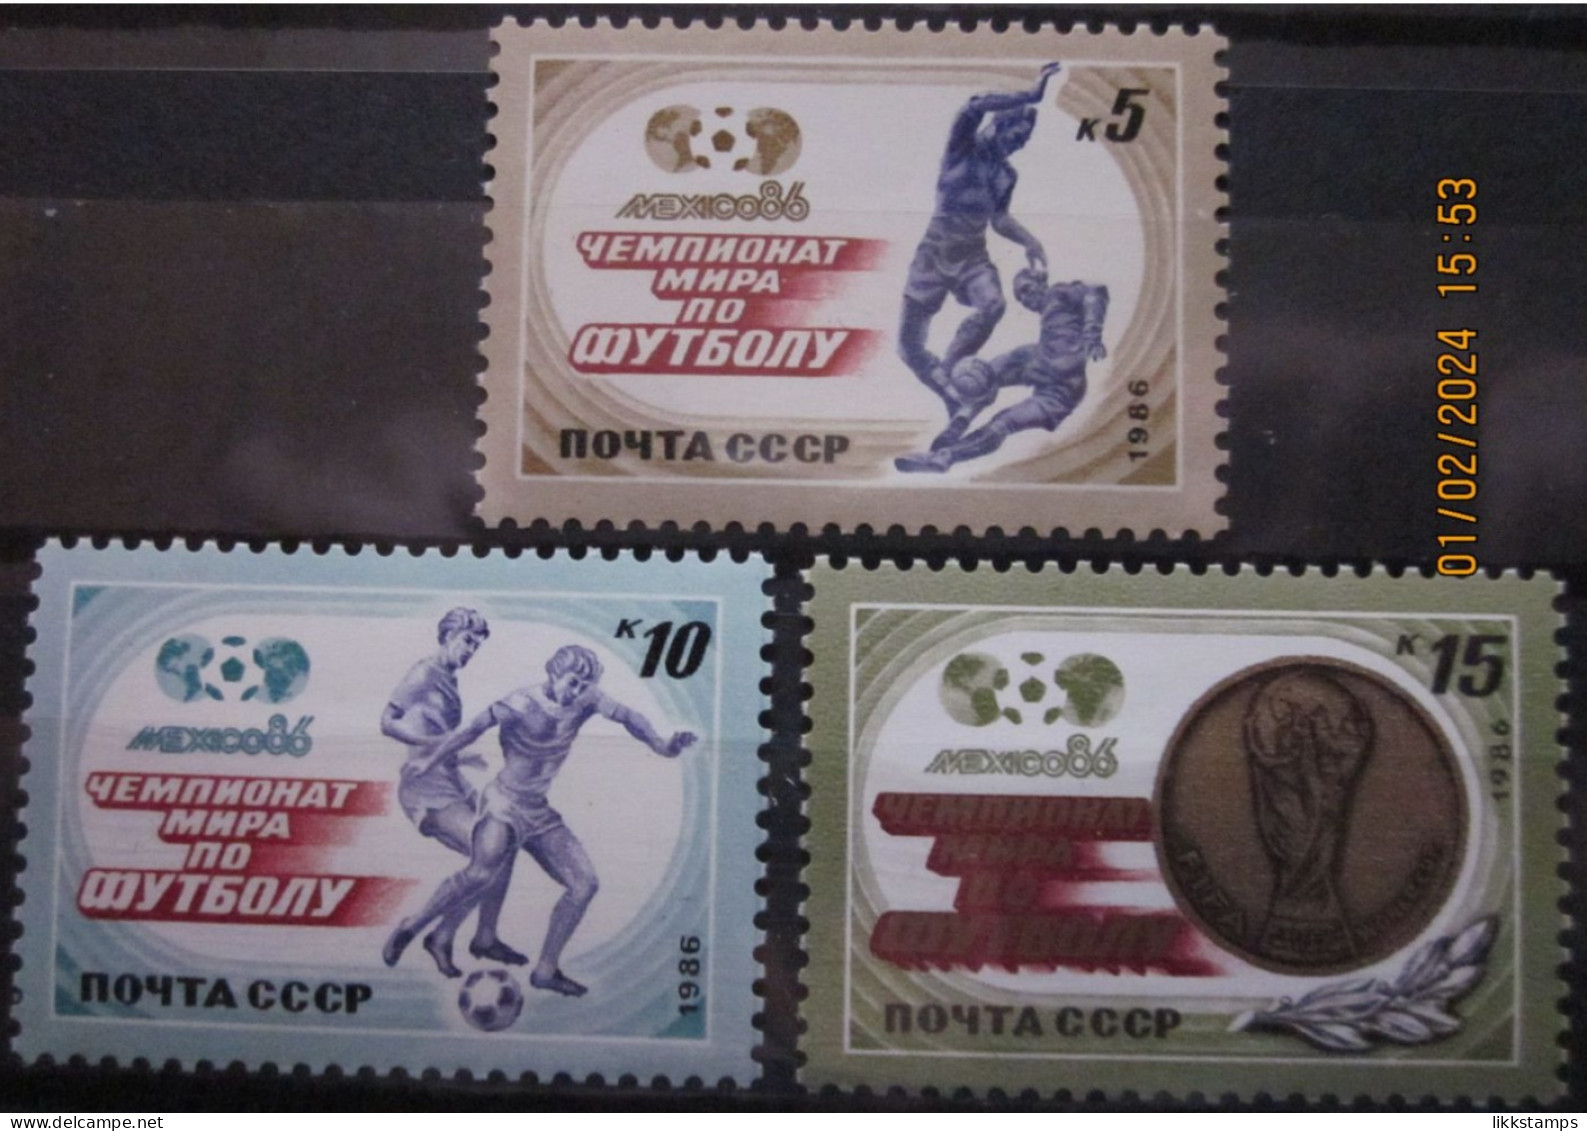 RUSSIA ~ 1986 ~ S.G. NUMBERS 5660 - 5662, ~ 'LOT C' ~ FOOTBALL. ~ MNH #03645 - Unused Stamps